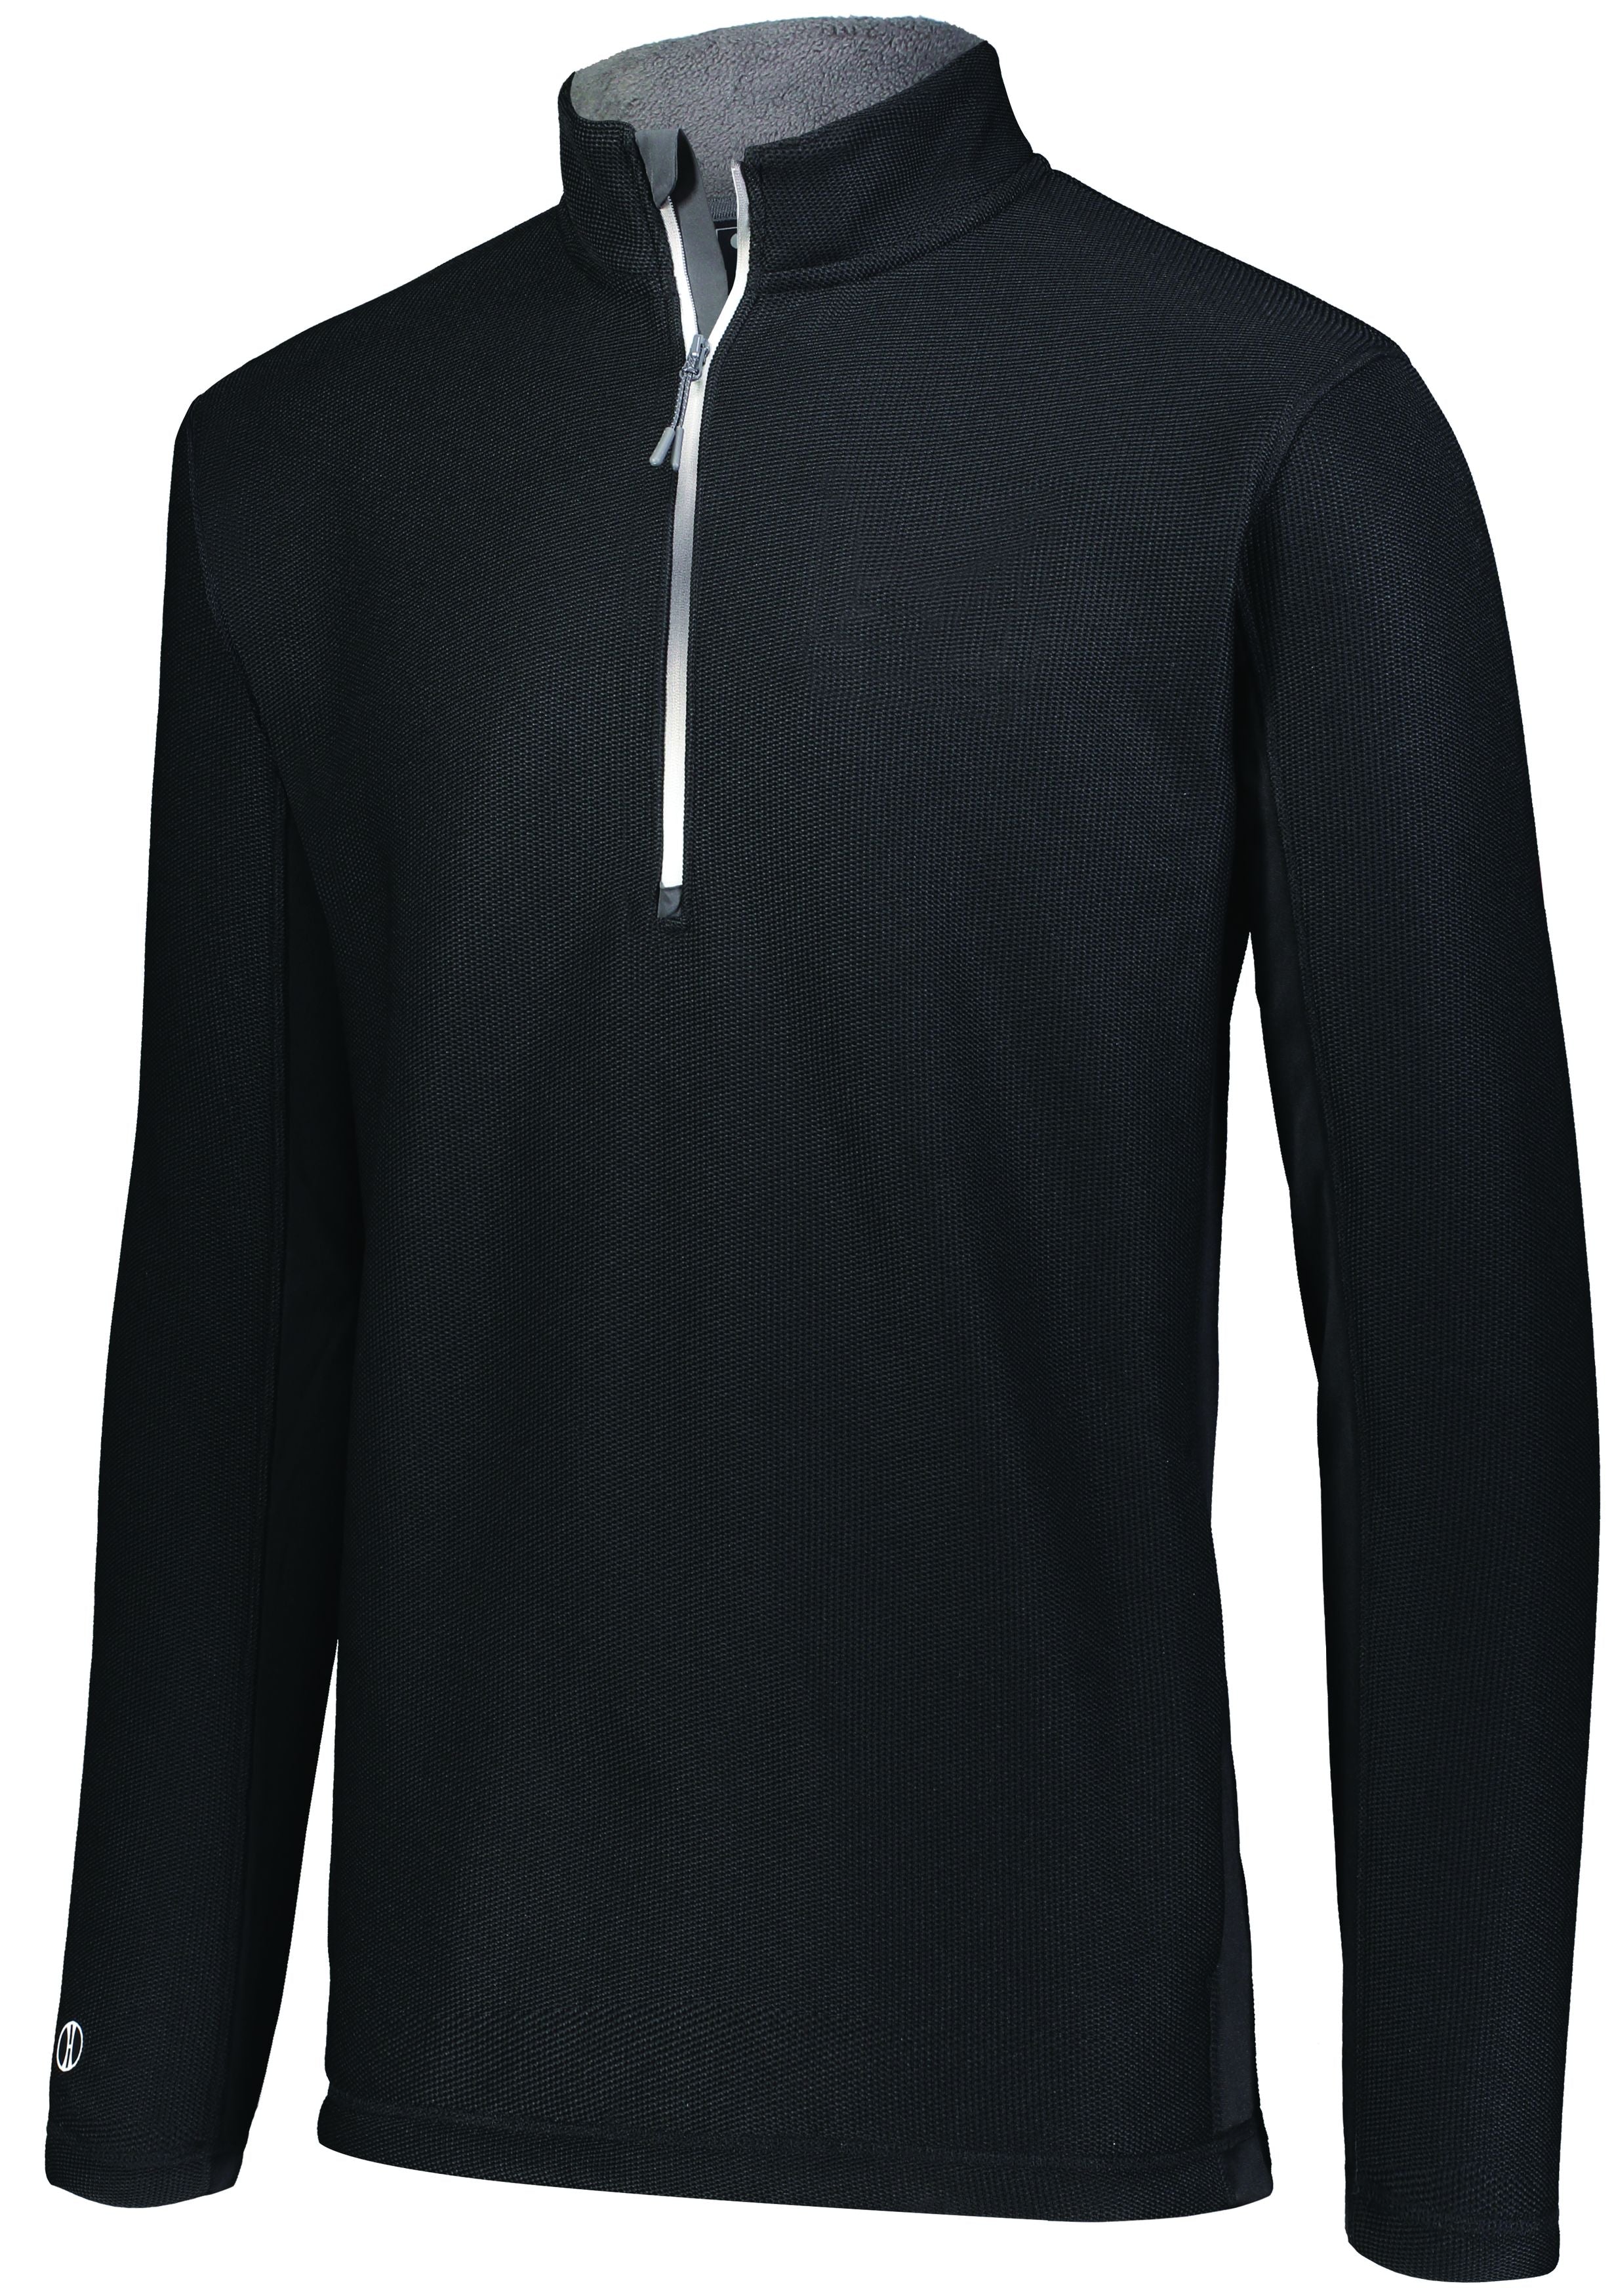 Holloway Invert 1/2 Zip Pullover in Black  -Part of the Adult, Adult-Pullover, Holloway, Outerwear, Invert-Collection product lines at KanaleyCreations.com